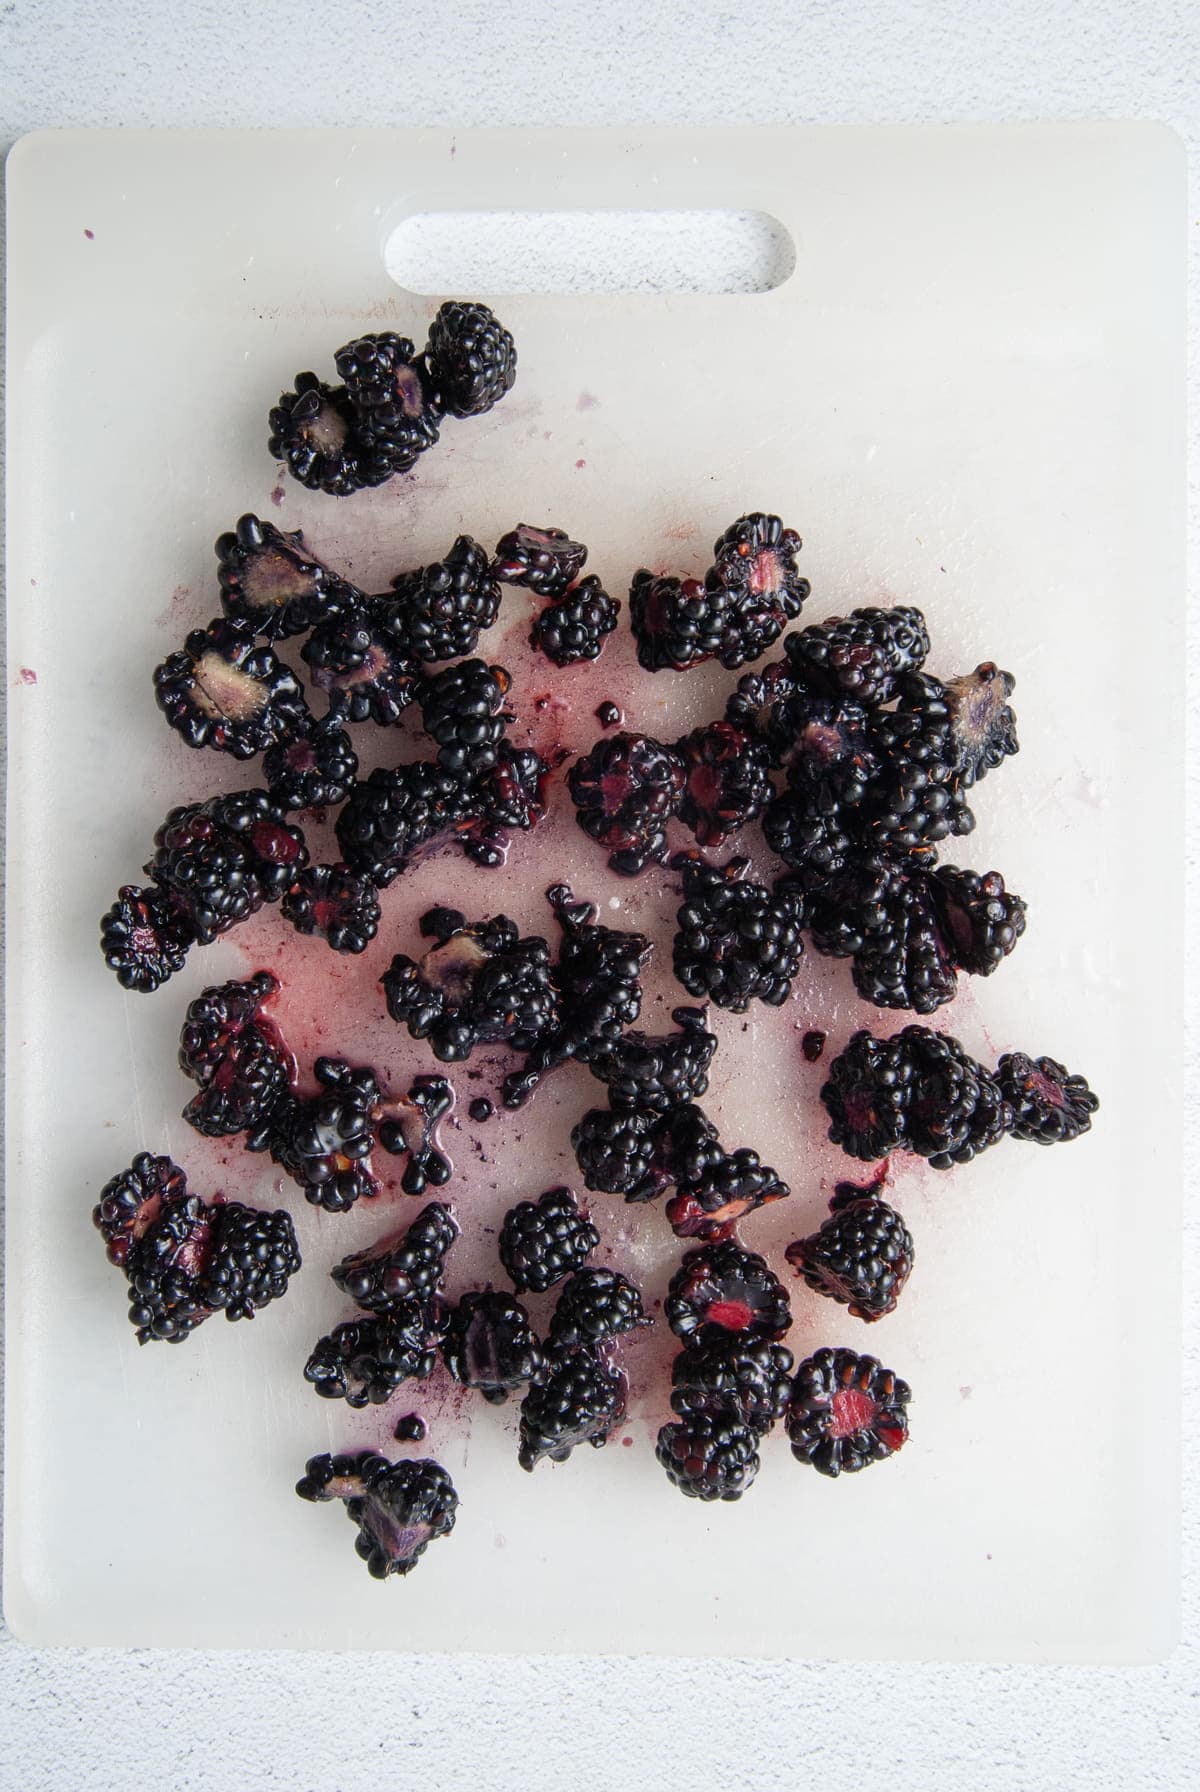 chopping blackberries to add to muffins